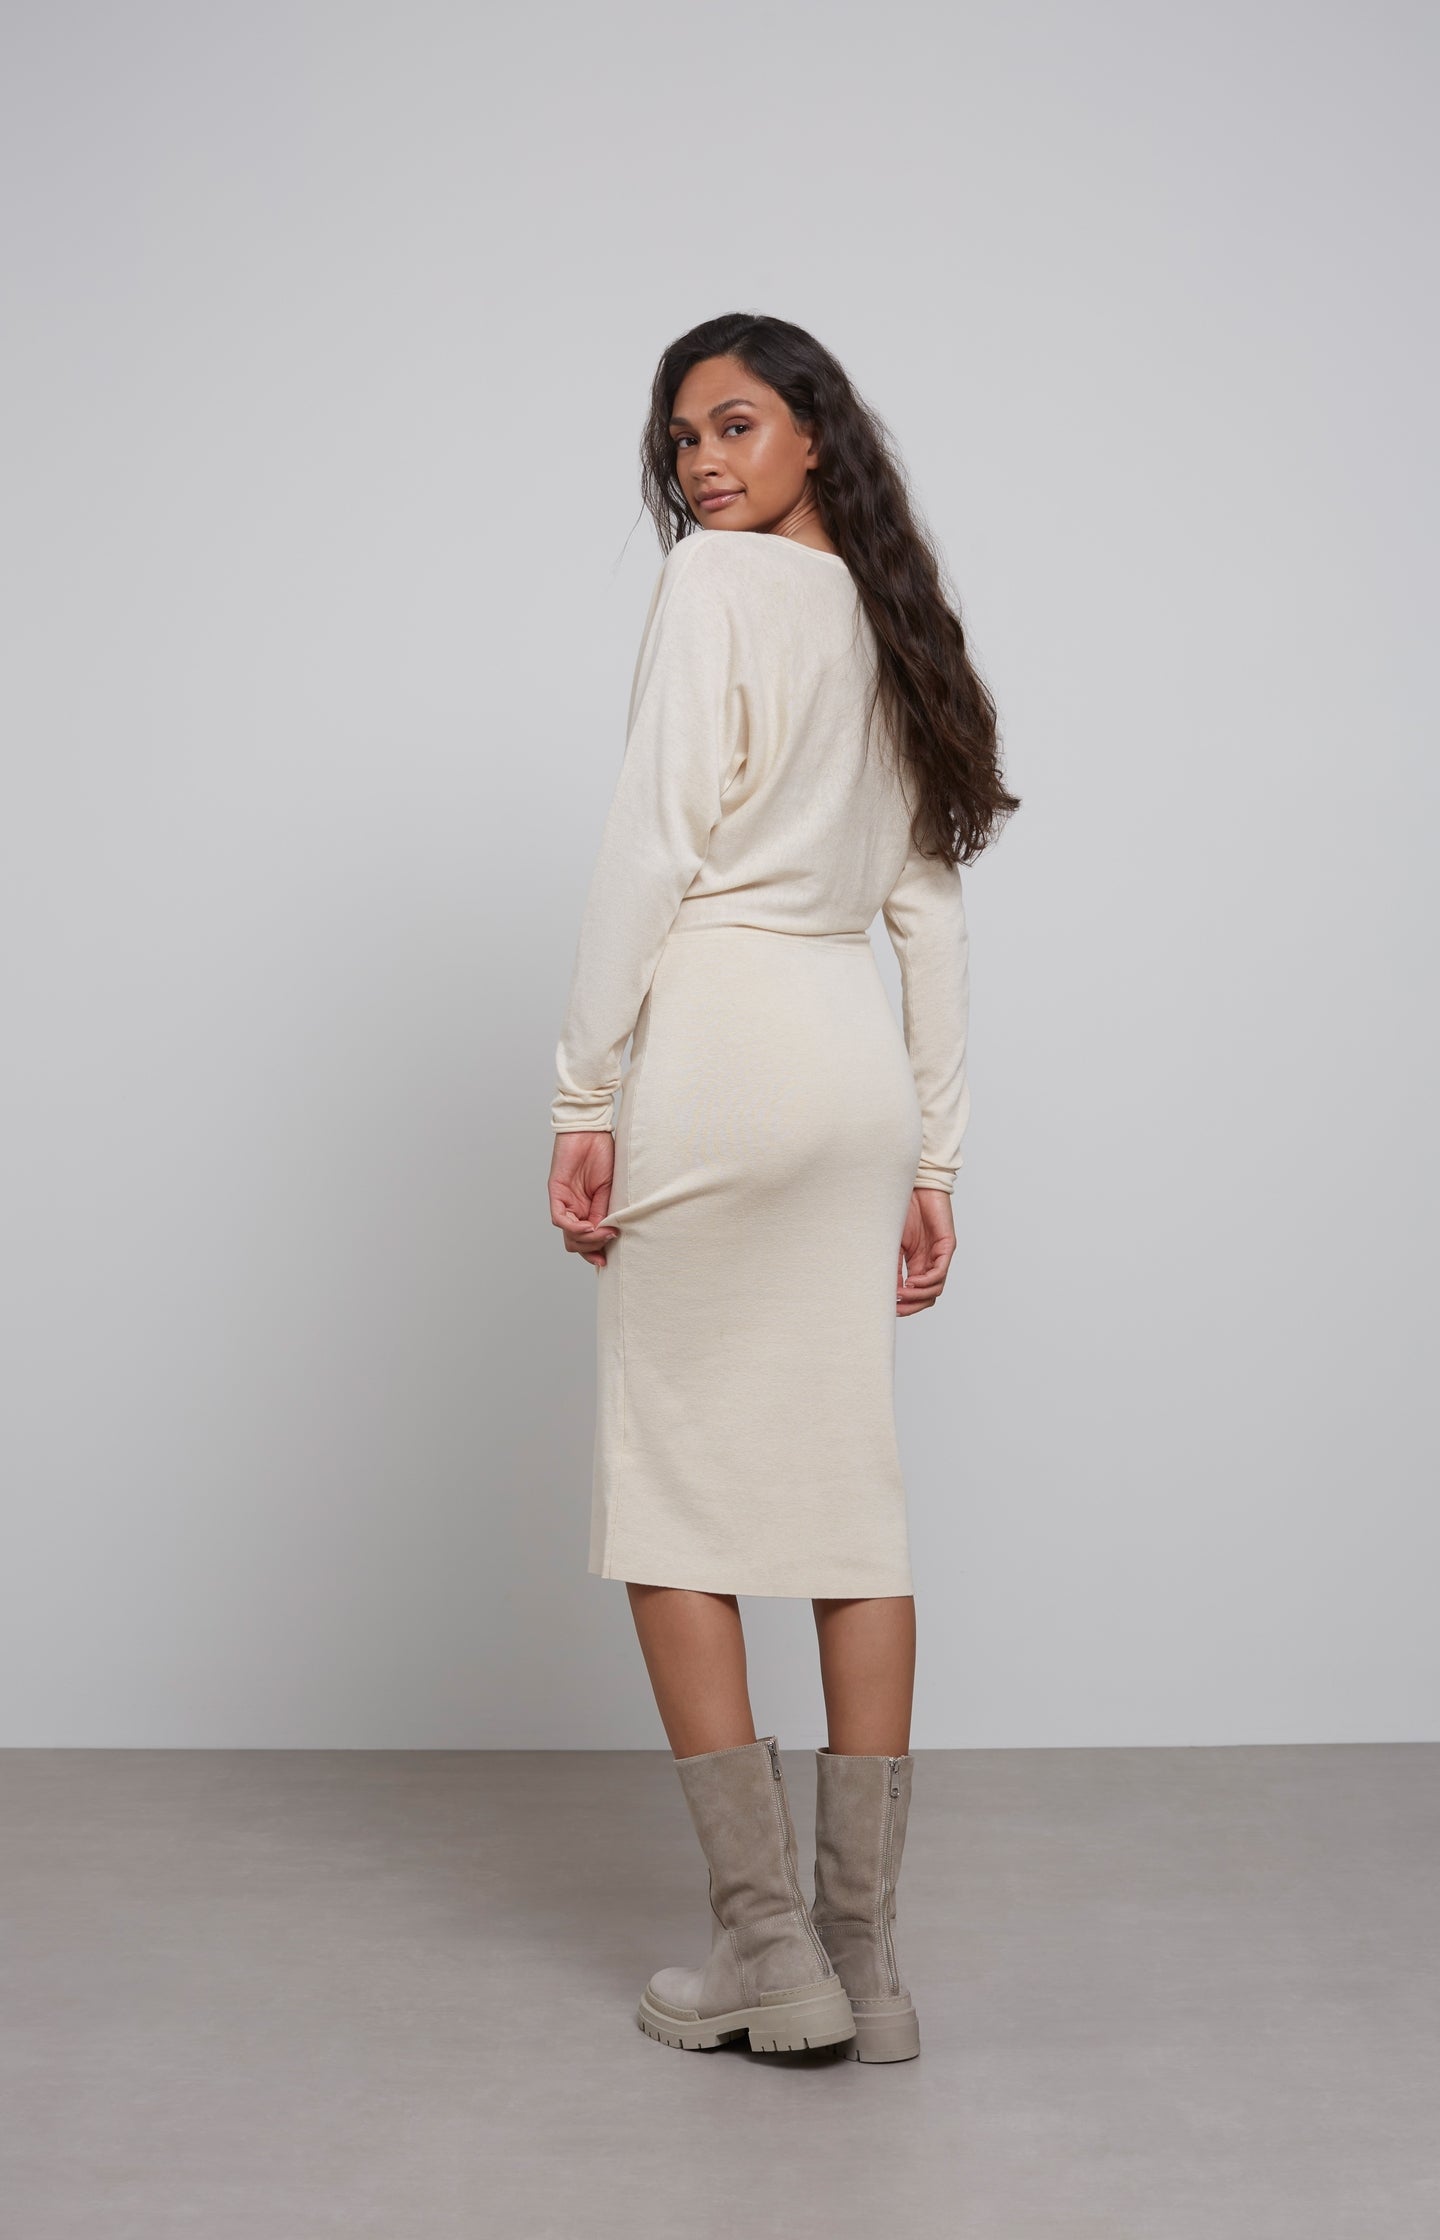 Midi dress with V-neck and long sleeves in a close fit